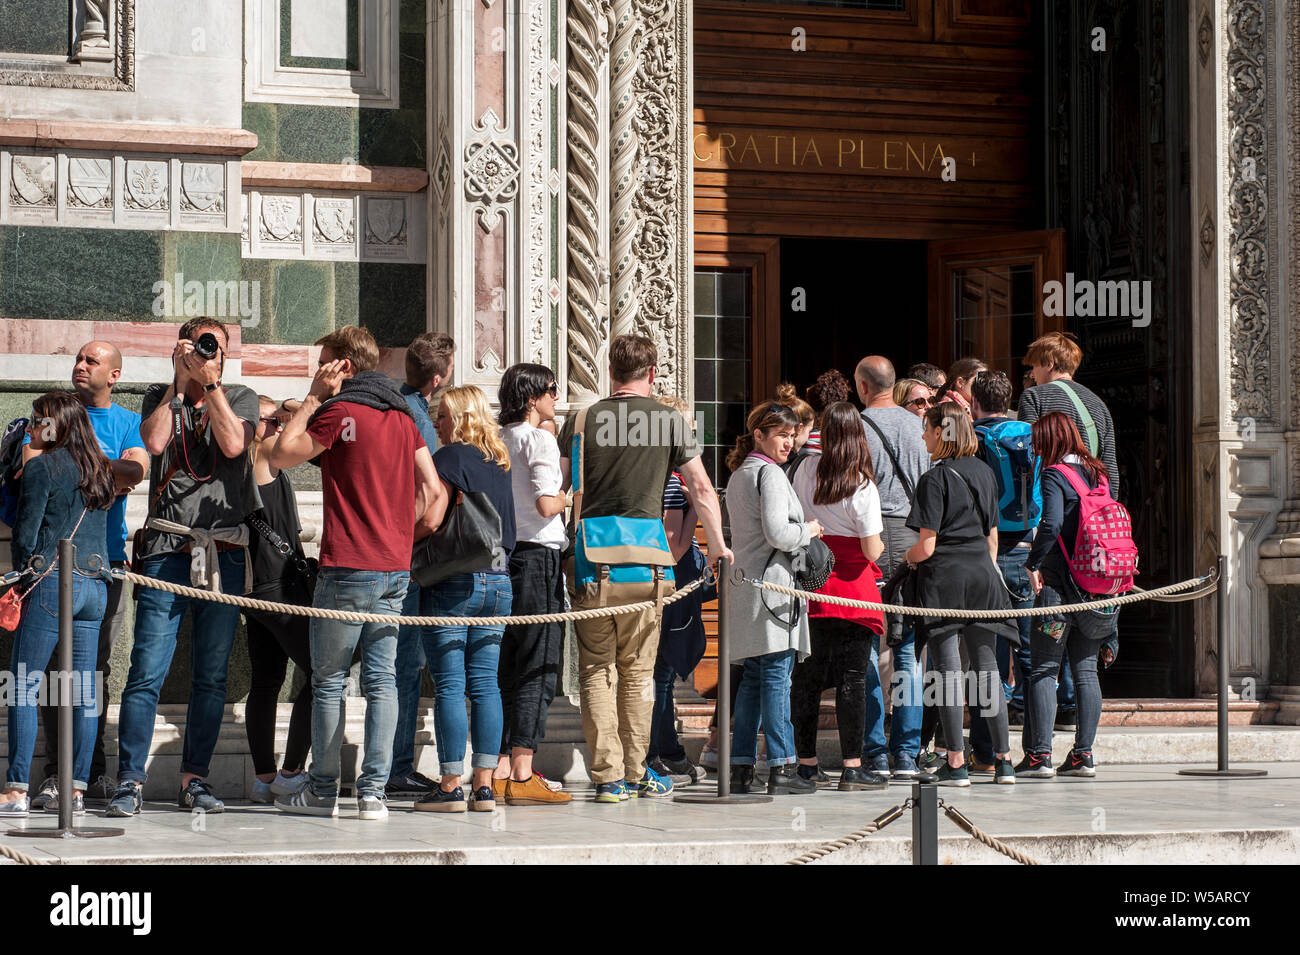 Florence, Italy - April 7, 2018: Tourists queue waiting at the entrance of Santa Maria del Fiore Cathedral, in Florence. Stock Photo